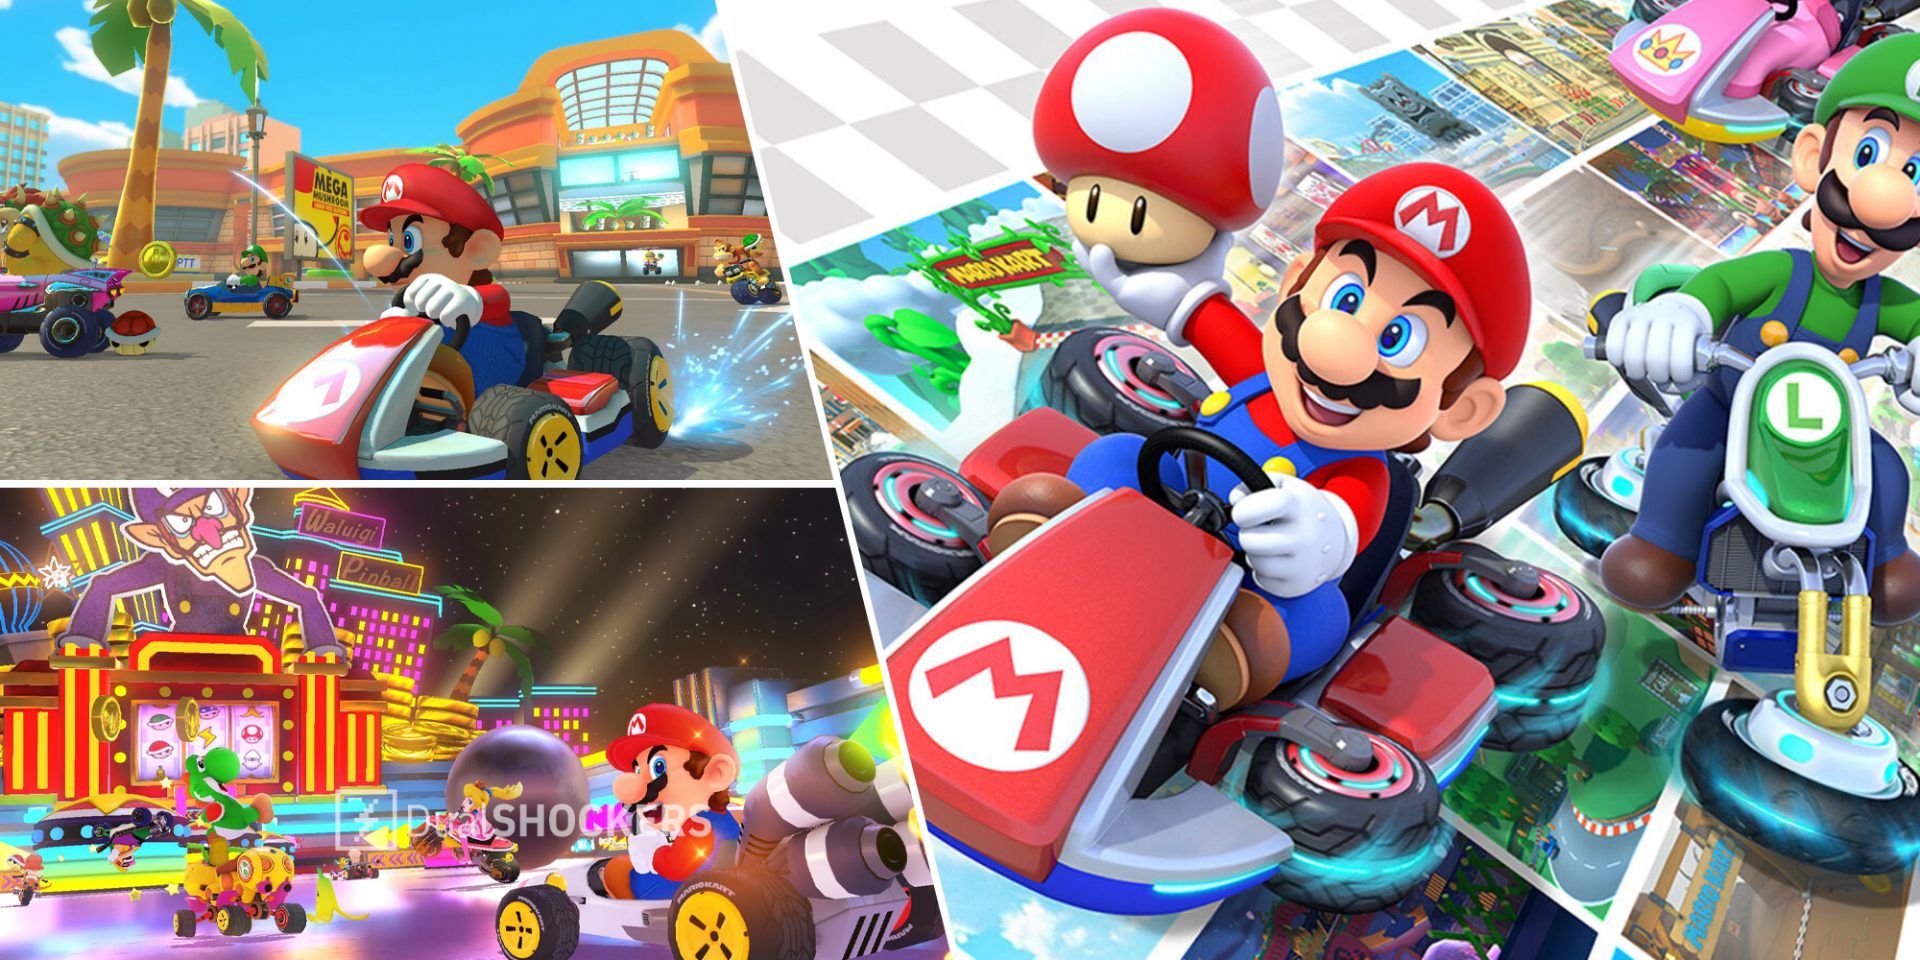 Mario Kart 8 Deluxe Coconut Mall on top left, Waluigi Pinball on bottom left, Mario Kart 8 Deluxe promo image with Mario and Luigi